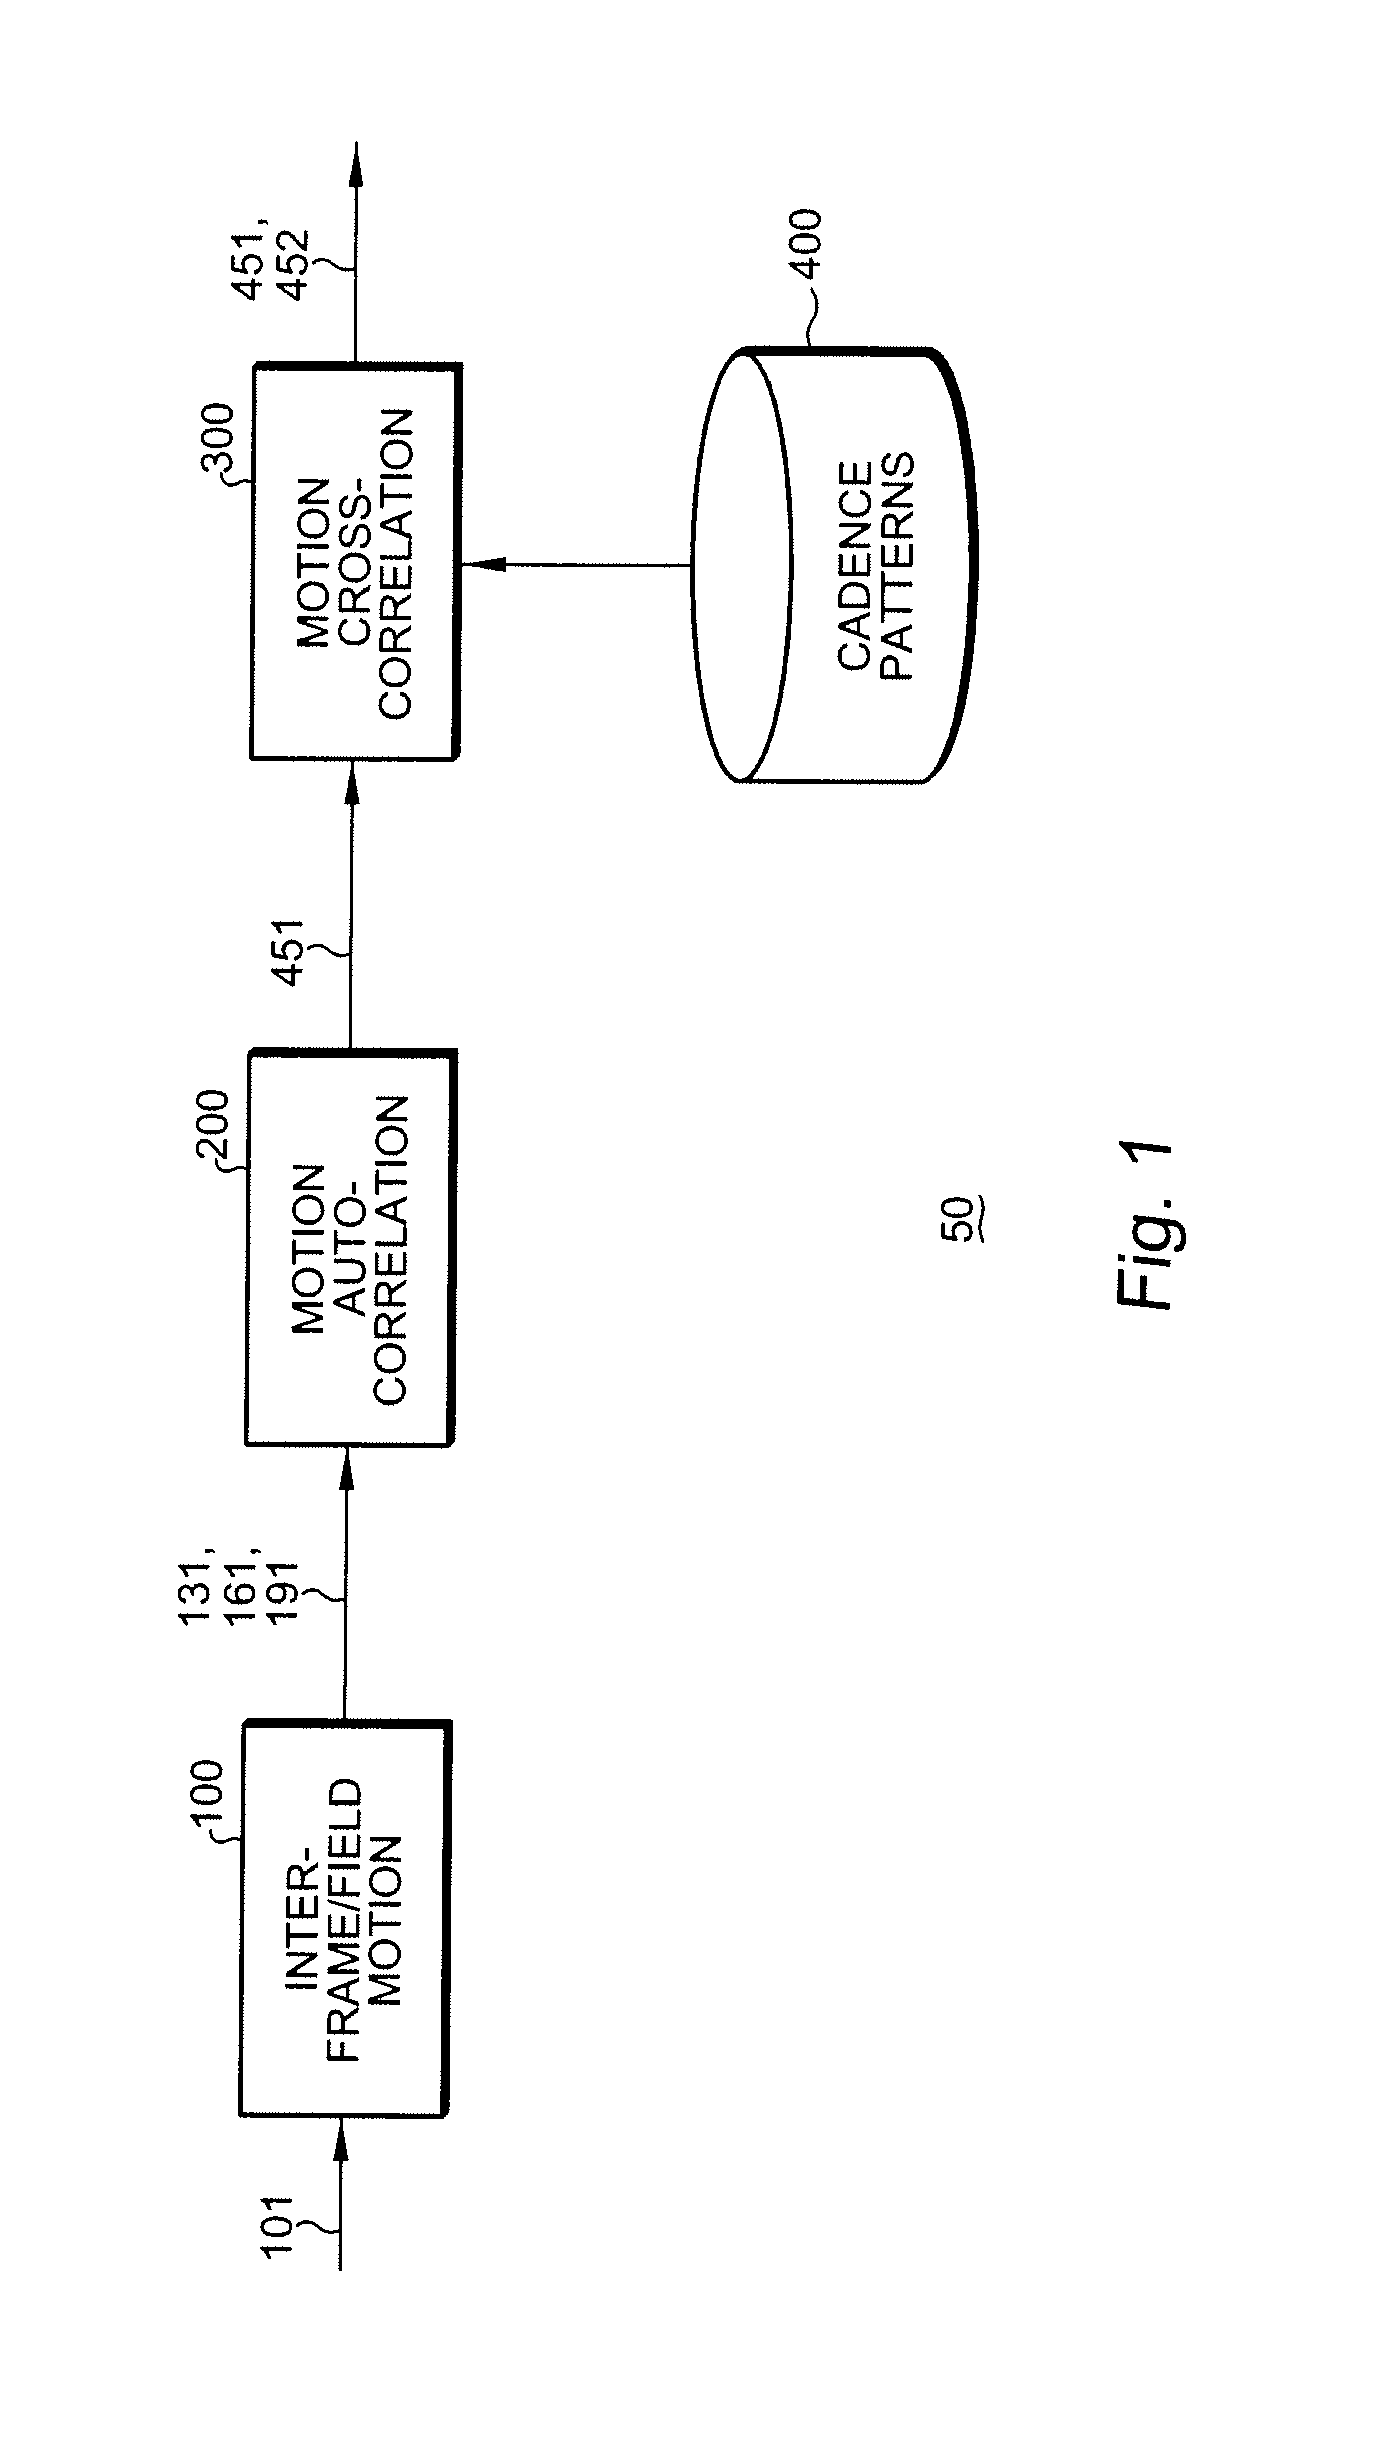 Apparatus and method for exotic cadence detection